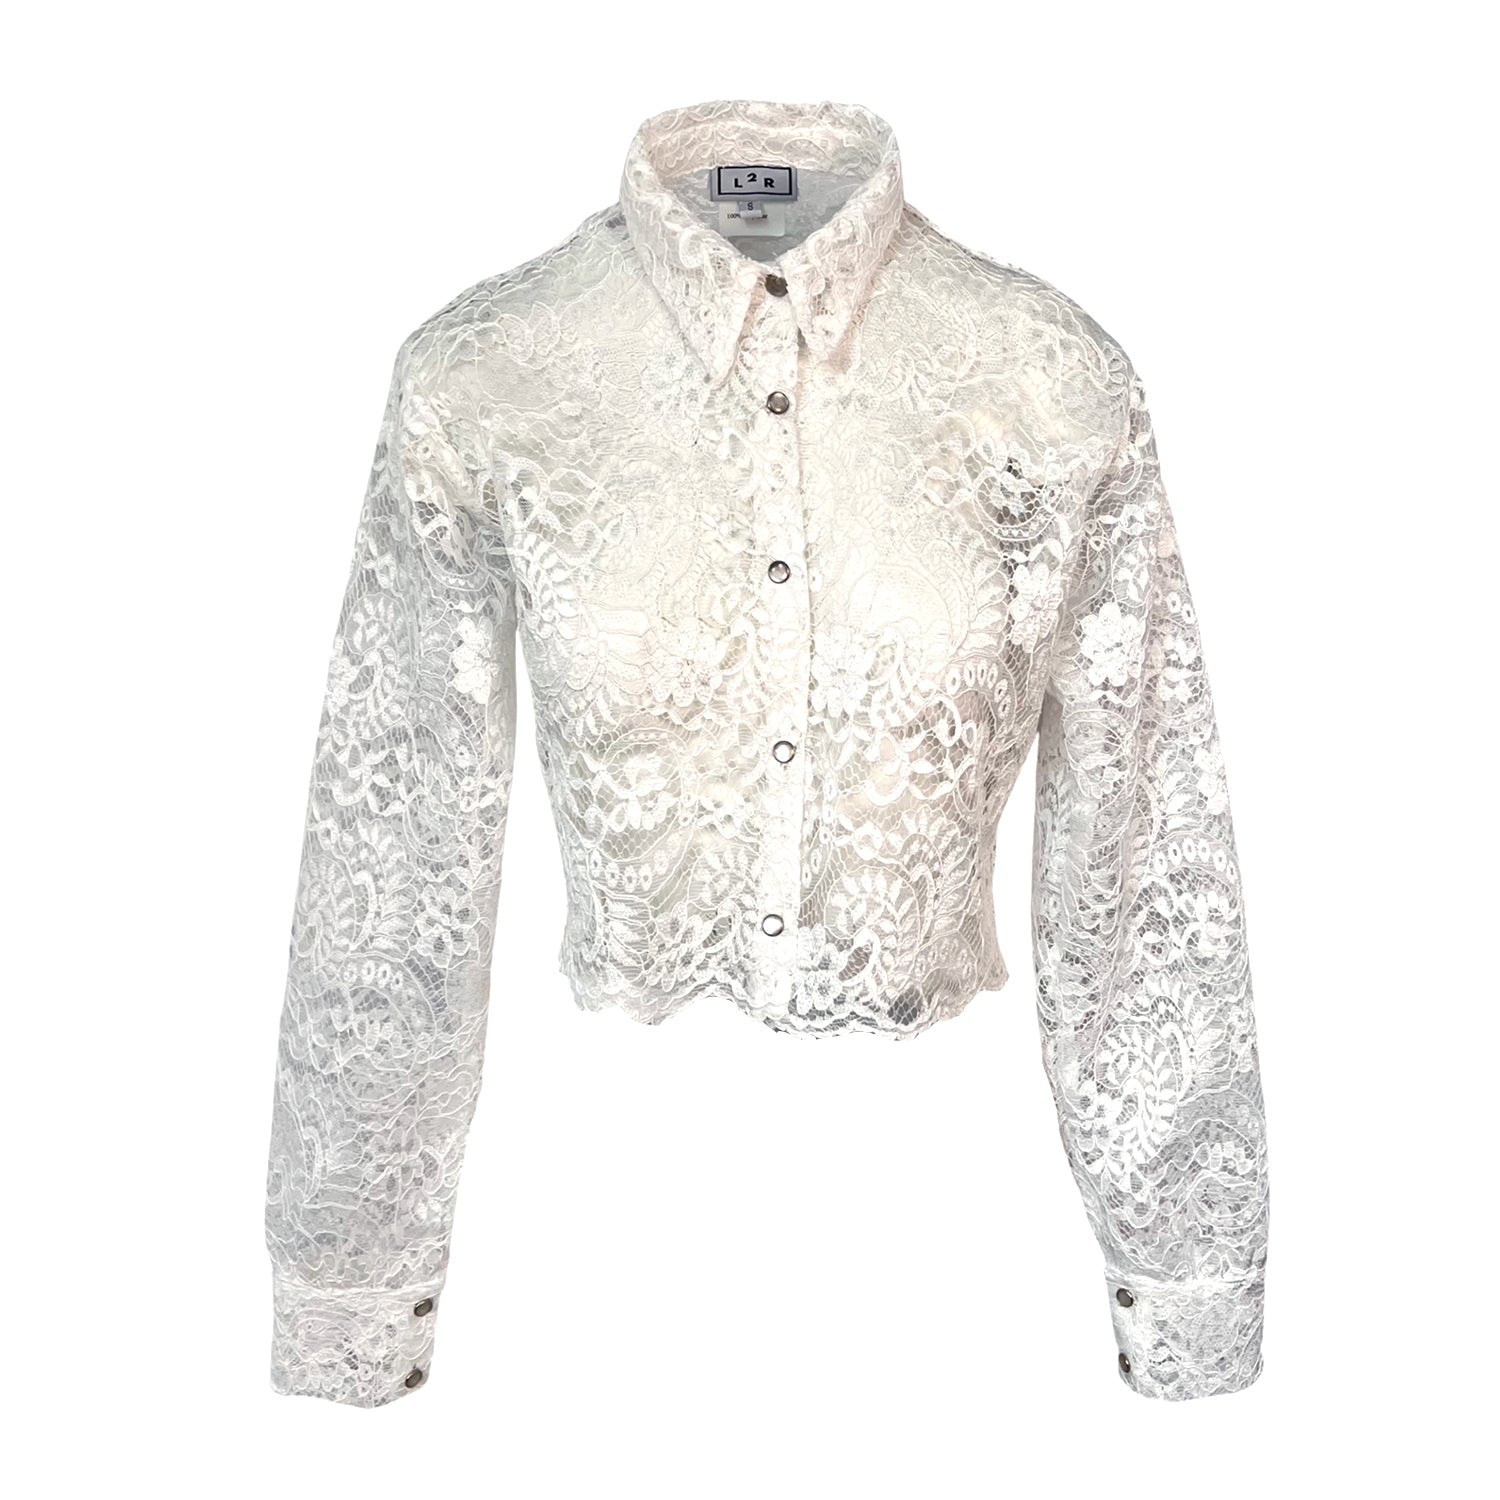 L2r The Label Women's Cropped Shirt - White Lace